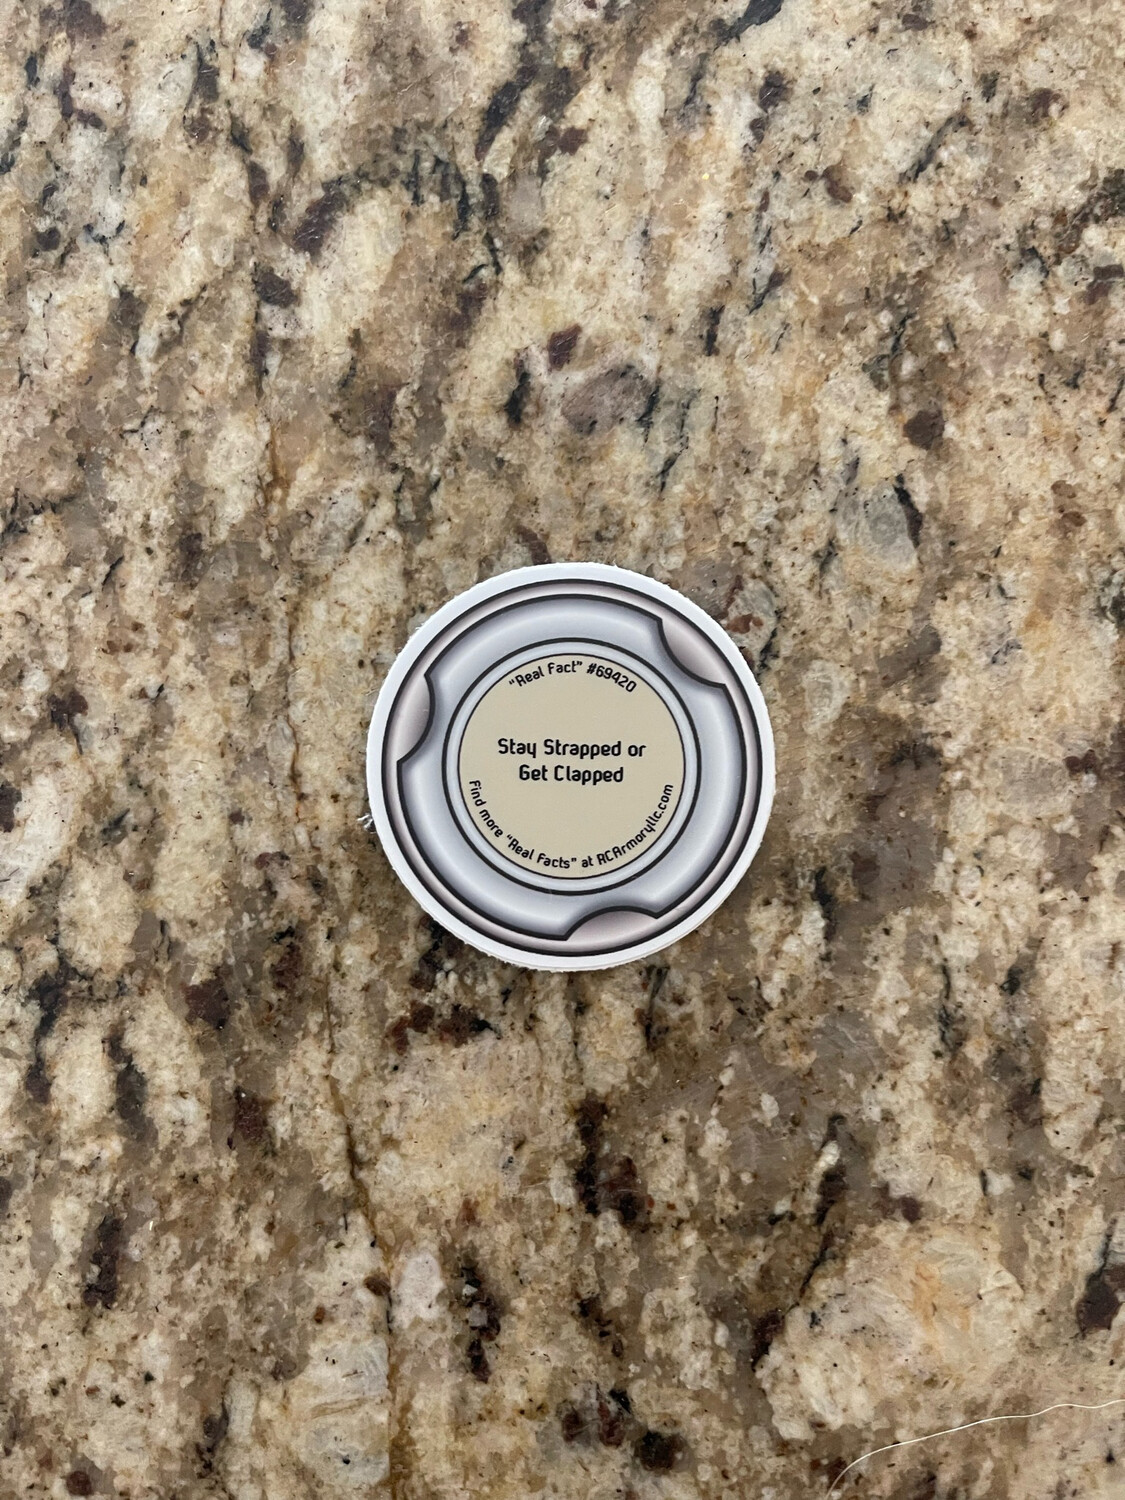 Snapple Cap “Real Fact” Stickers